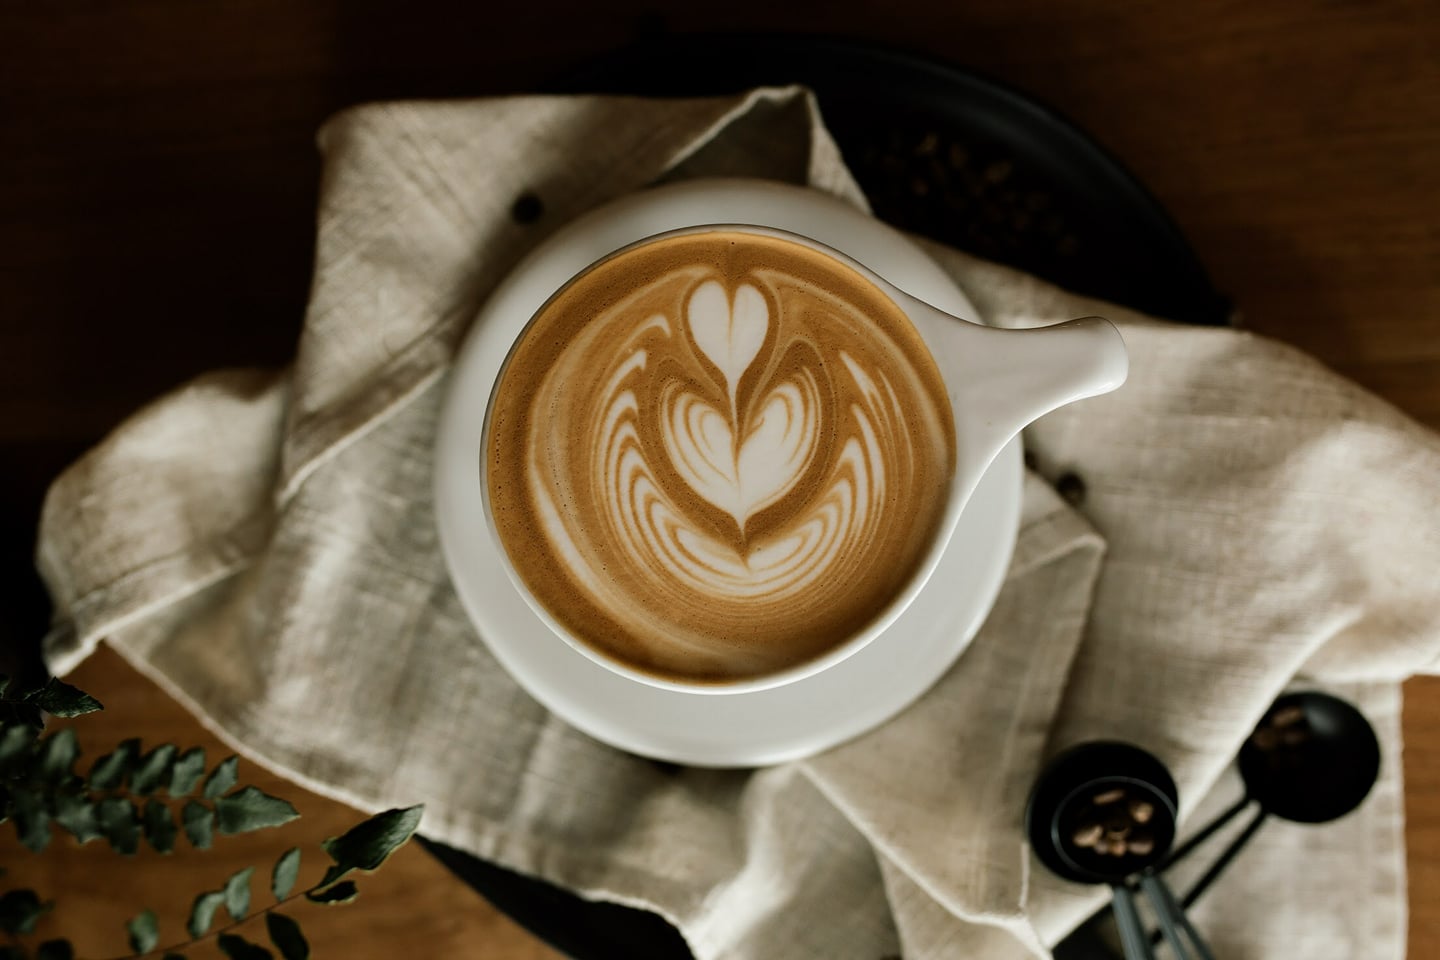 Ponder Coffee Company latte, with a beautiful heart-shaped leaf design created with foam.